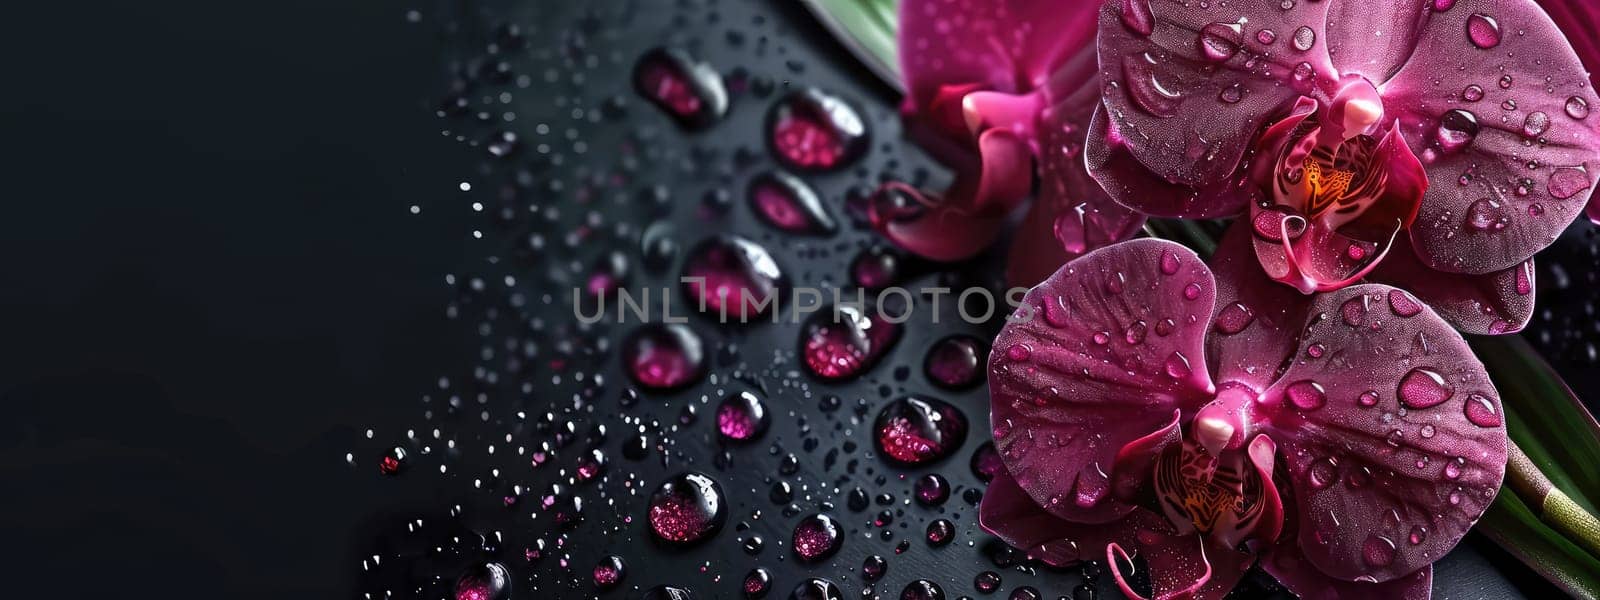 Close-up of a flower in drops of water. Selective focus. Nature.